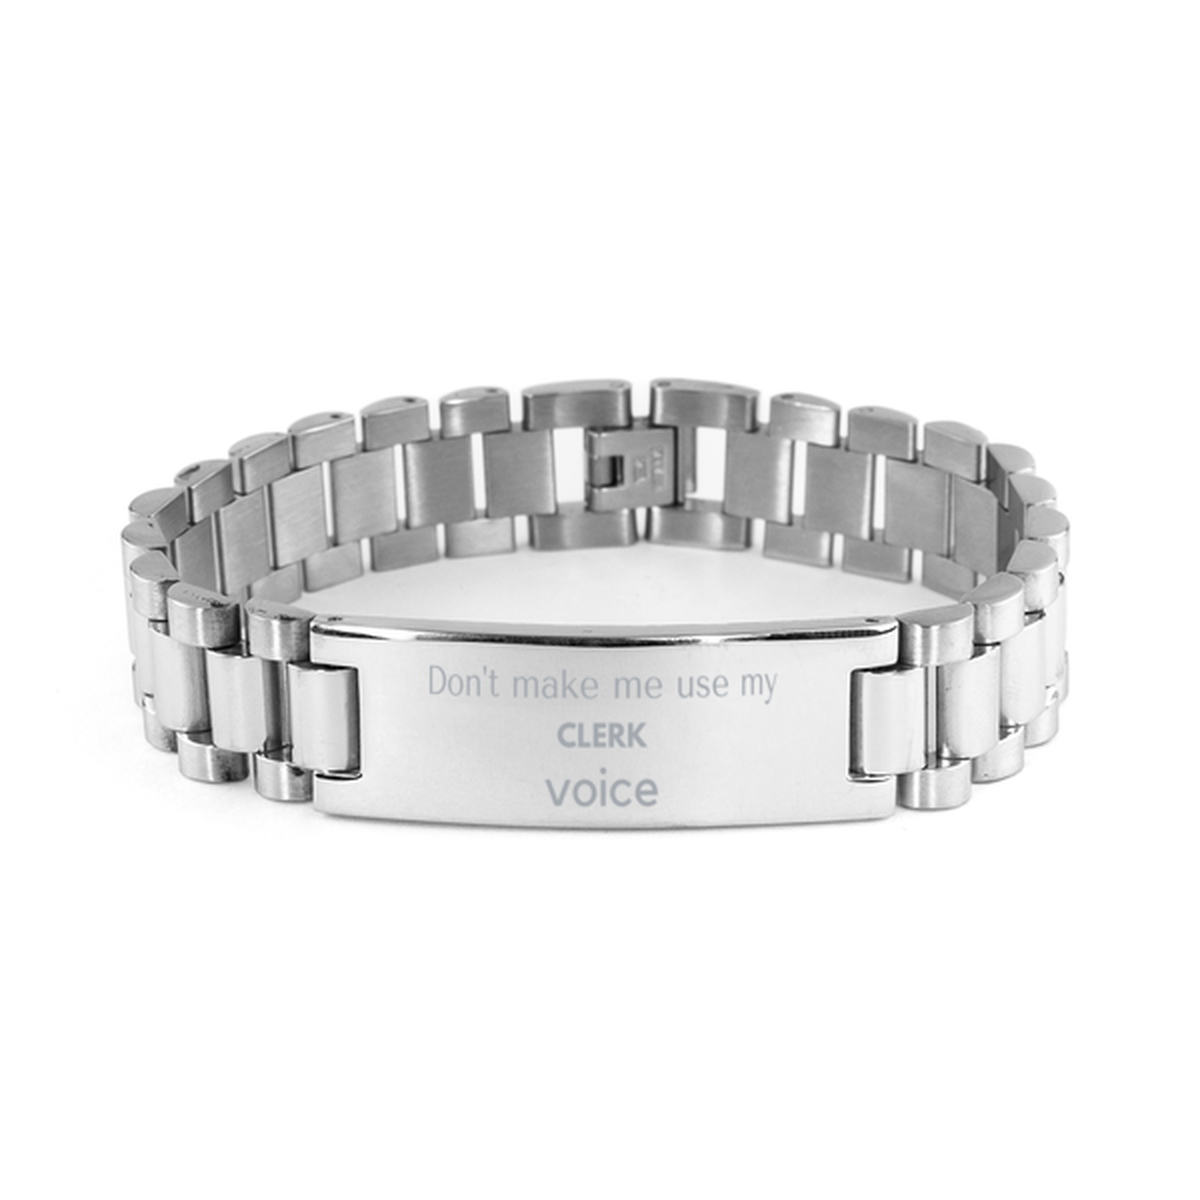 Don't make me use my Clerk voice, Sarcasm Clerk Gifts, Christmas Clerk Ladder Stainless Steel Bracelet Birthday Unique Gifts For Clerk Coworkers, Men, Women, Colleague, Friends